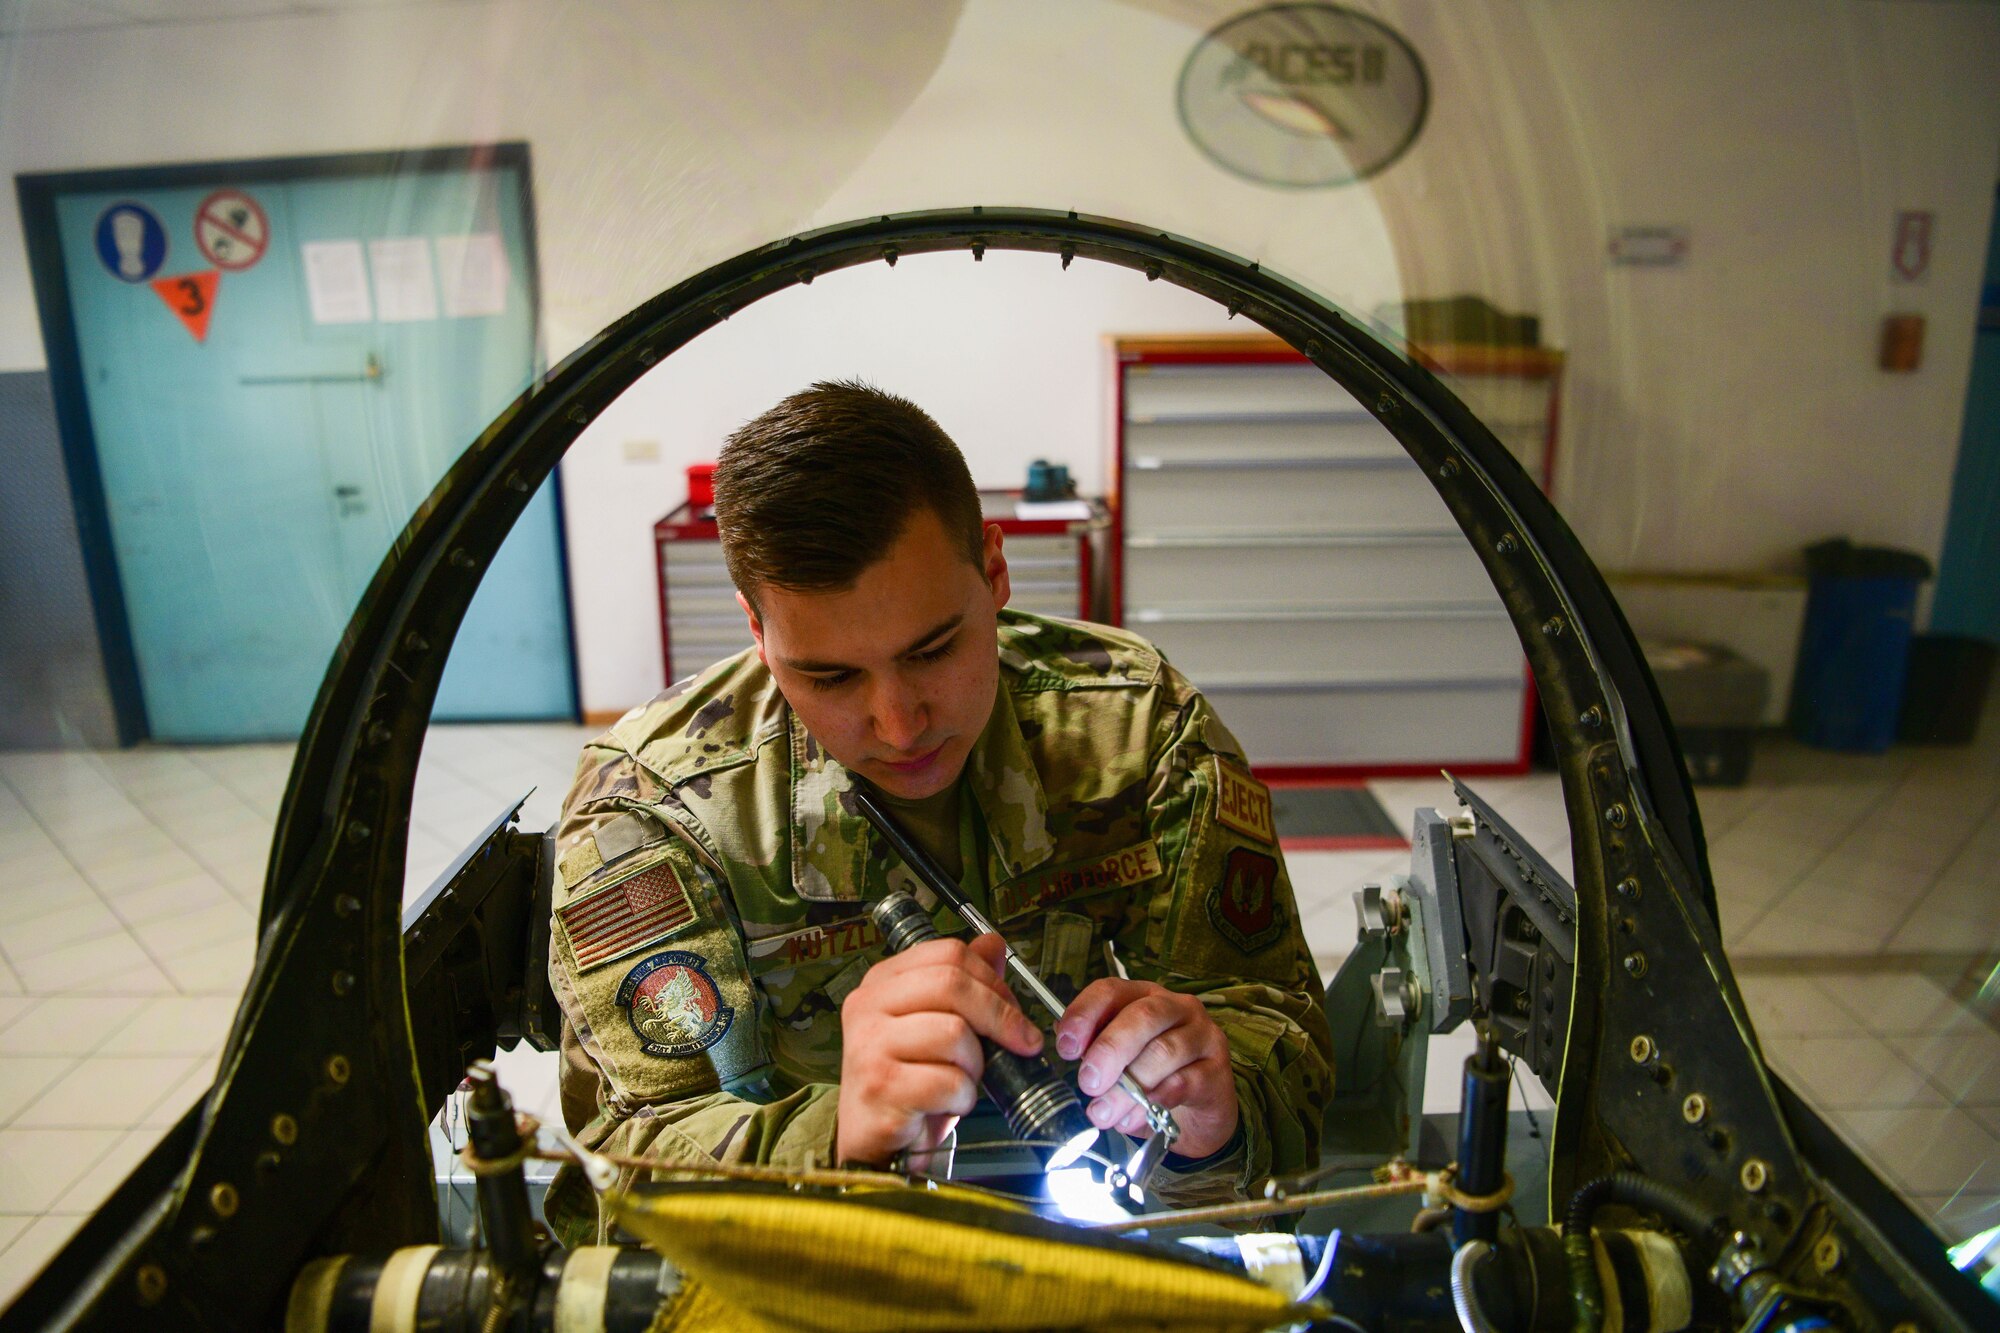 Senior Airman Reece Kutzli, 31st Maintenance Squadron Egress journeyman, screws bolts into an F-16 Fighting Falcon canopy at Aviano Air Base, Italy, Aug. 10, 2022. Six bases across multiple major commands that have different environmental factors were chosen to test a new Luna transparency for the F-16 canopy, which is supposed to reduce the amount of water that sticks to the glass at certain angles. (U.S. Air Force photo by Senior Airman Brooke Moeder)